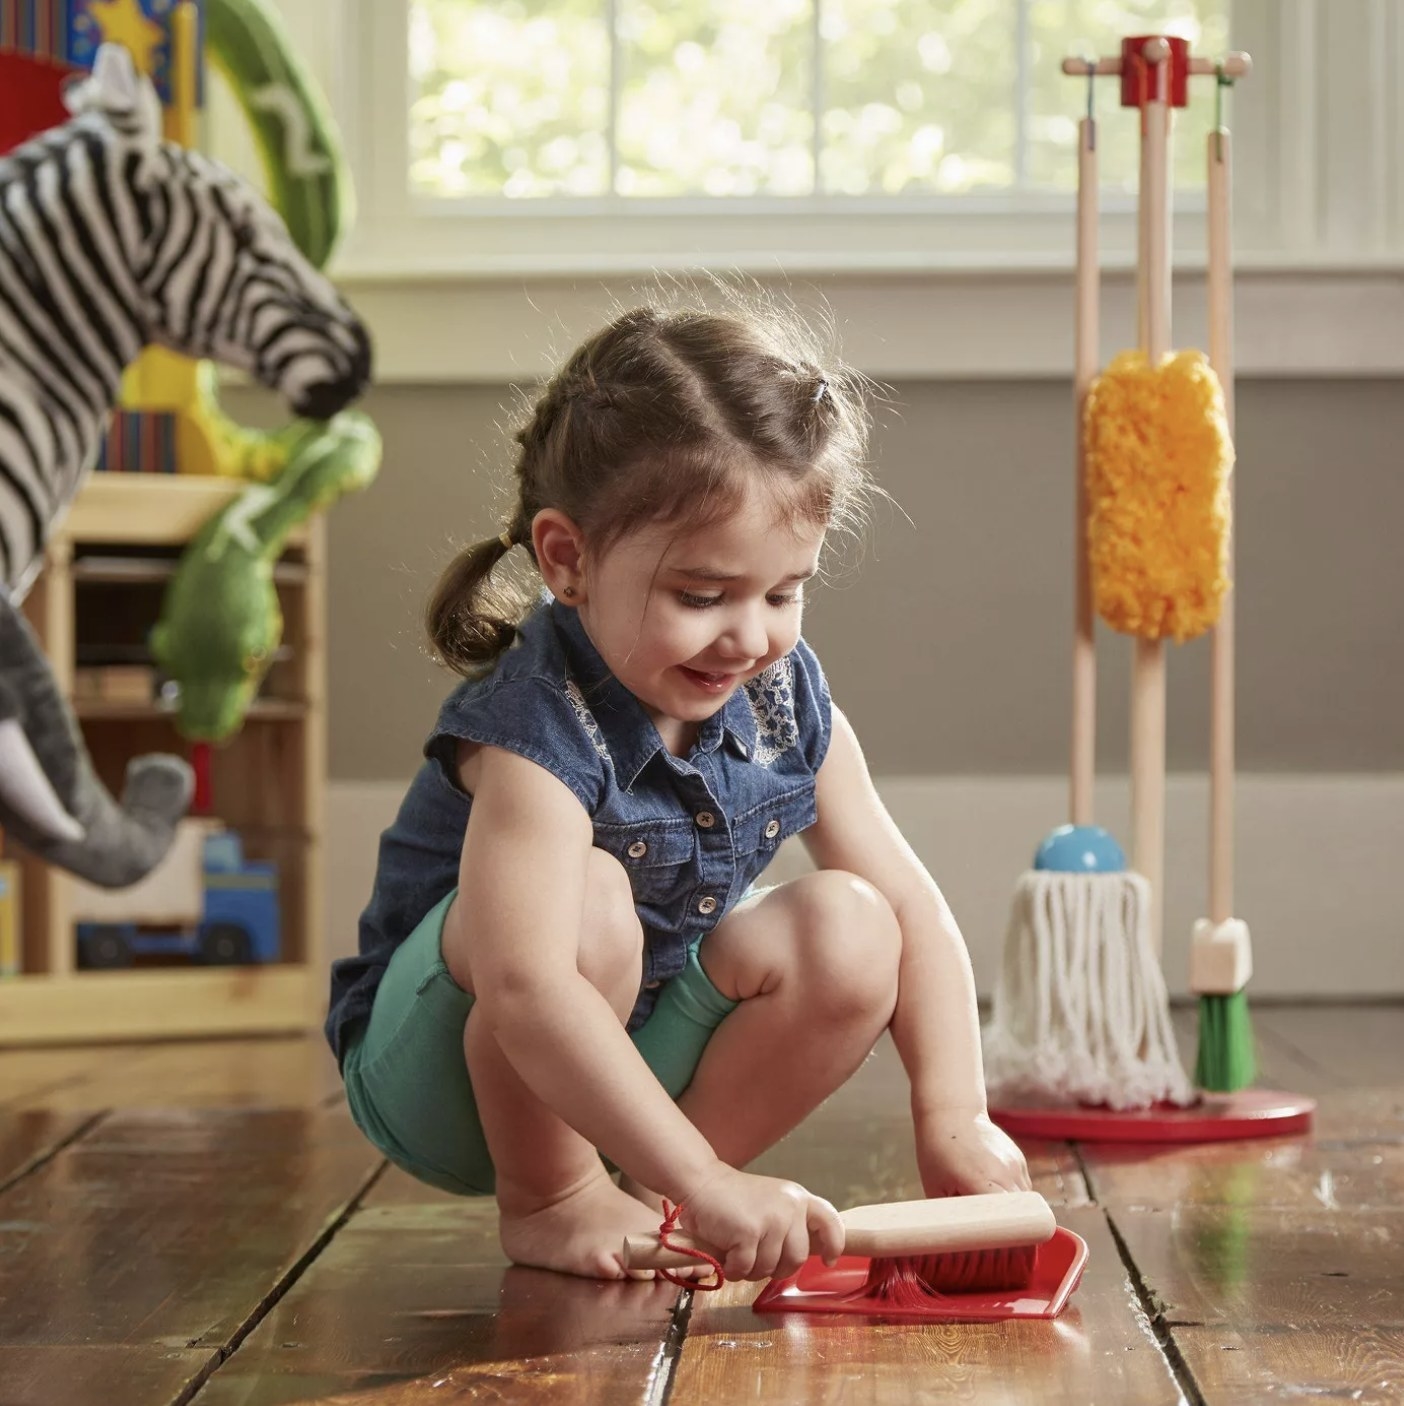 A child playing with a toy brush and dustpan